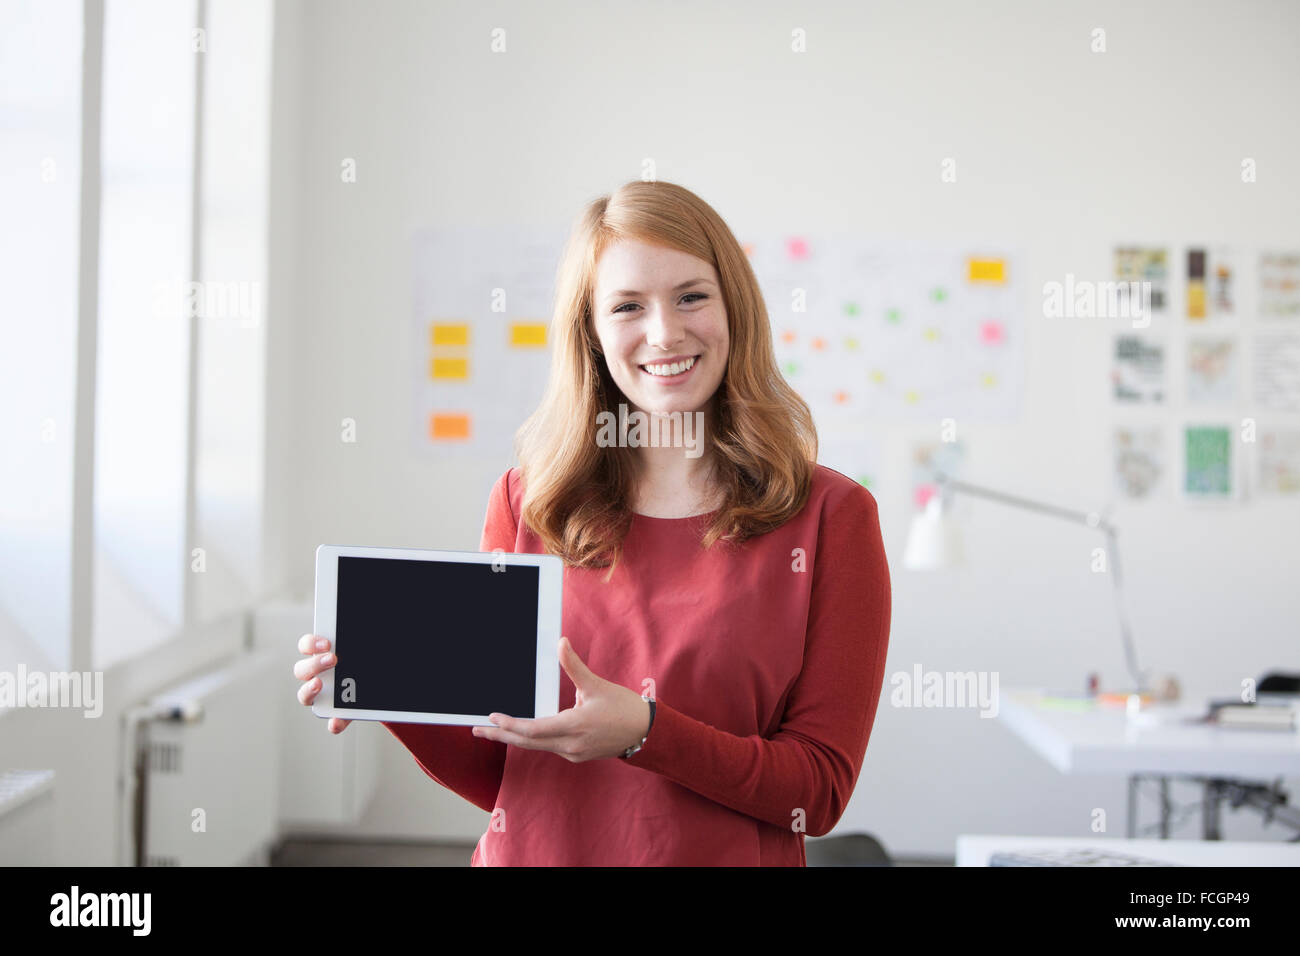 Young woman in office holding digital tablet Stock Photo